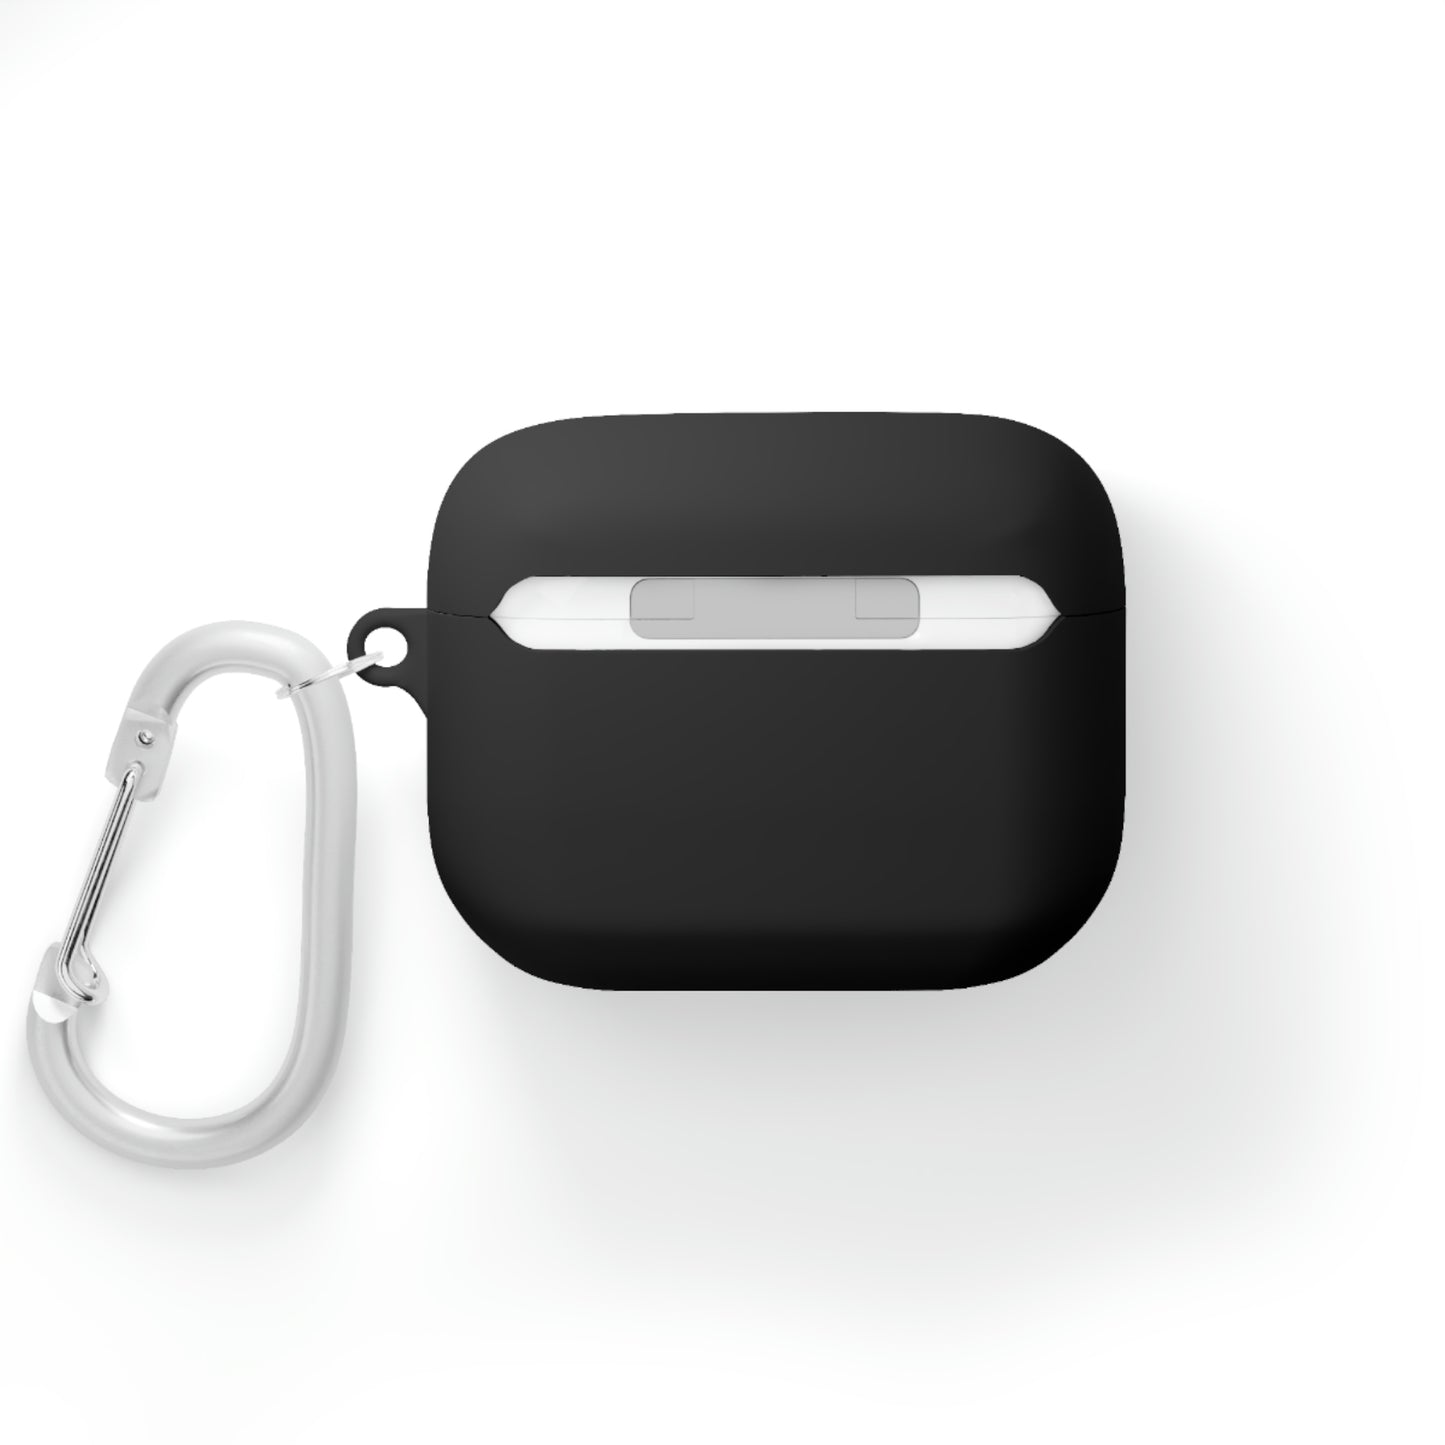 Euro Square and Compasses AirPods and AirPods Pro Case Cover